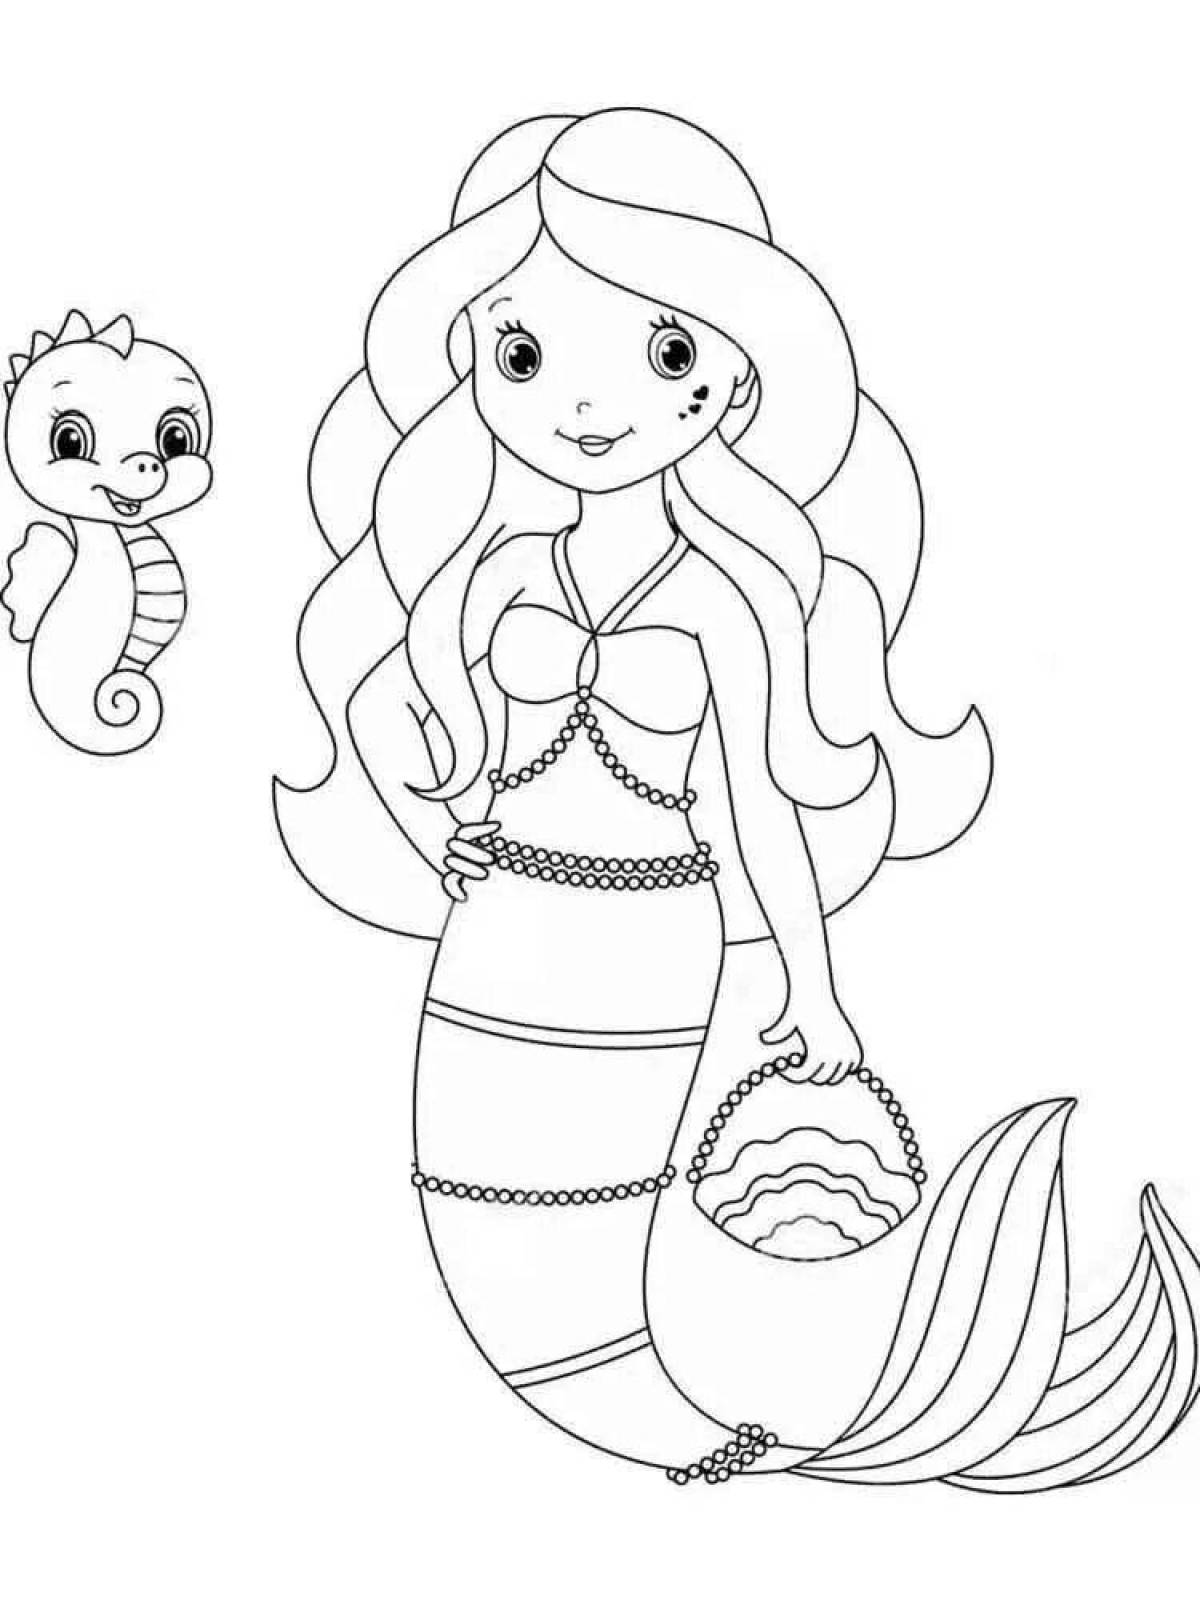 Whimsical mermaid coloring book for 4-5 year olds